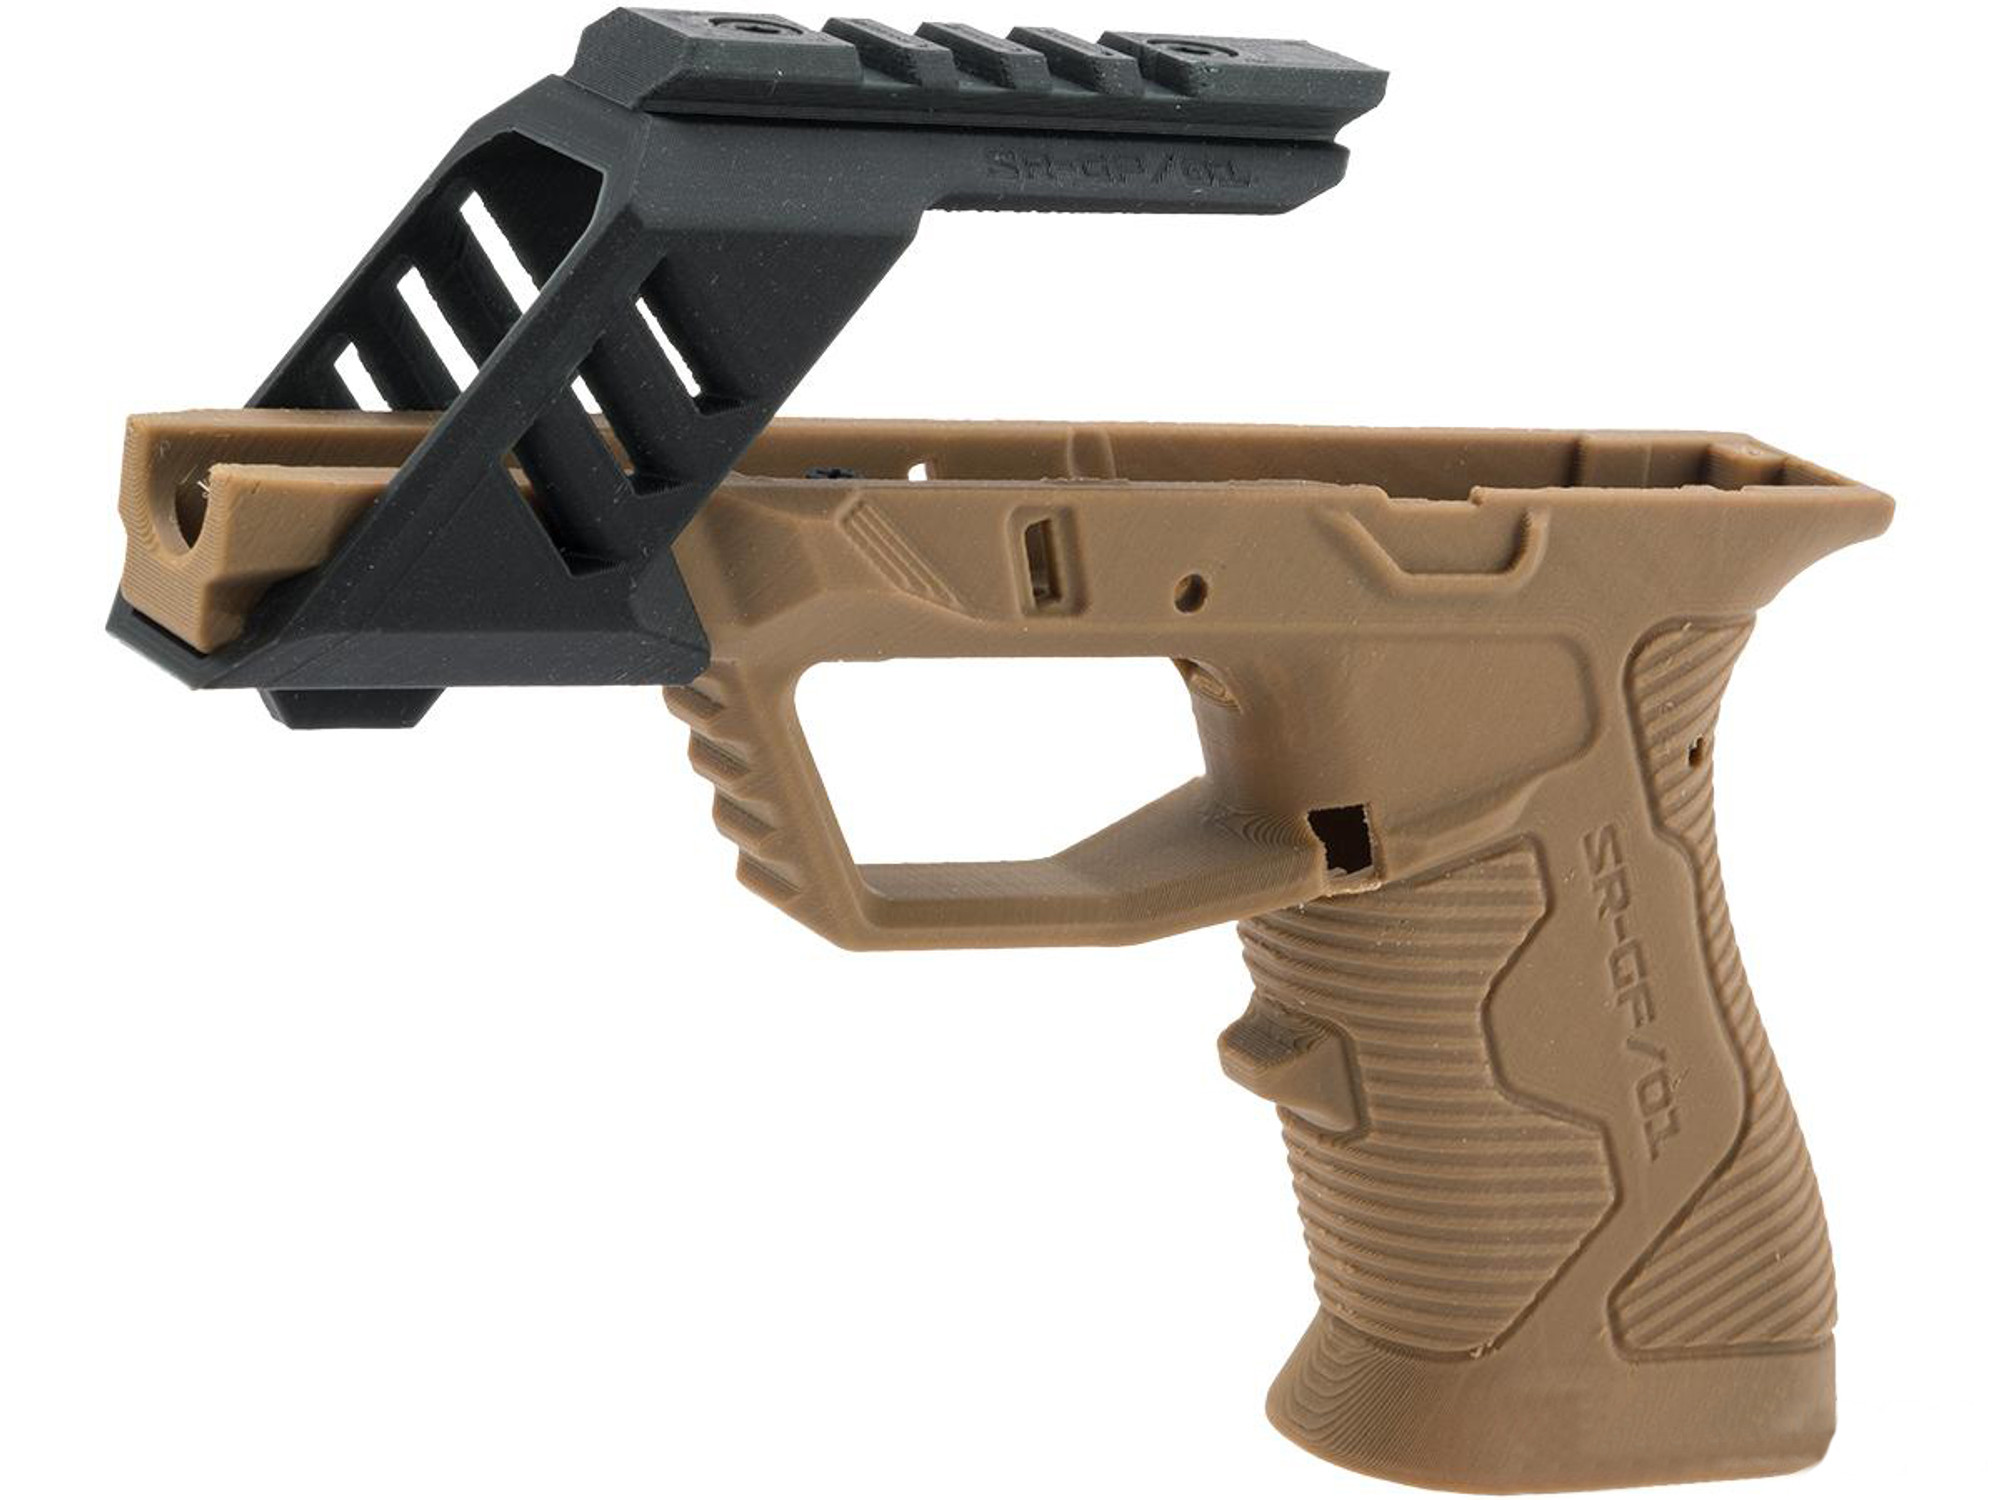 SRU 3D Printed Frame for WE-Tech and Tokyo Marui G Series Pistols (Color: Tan)